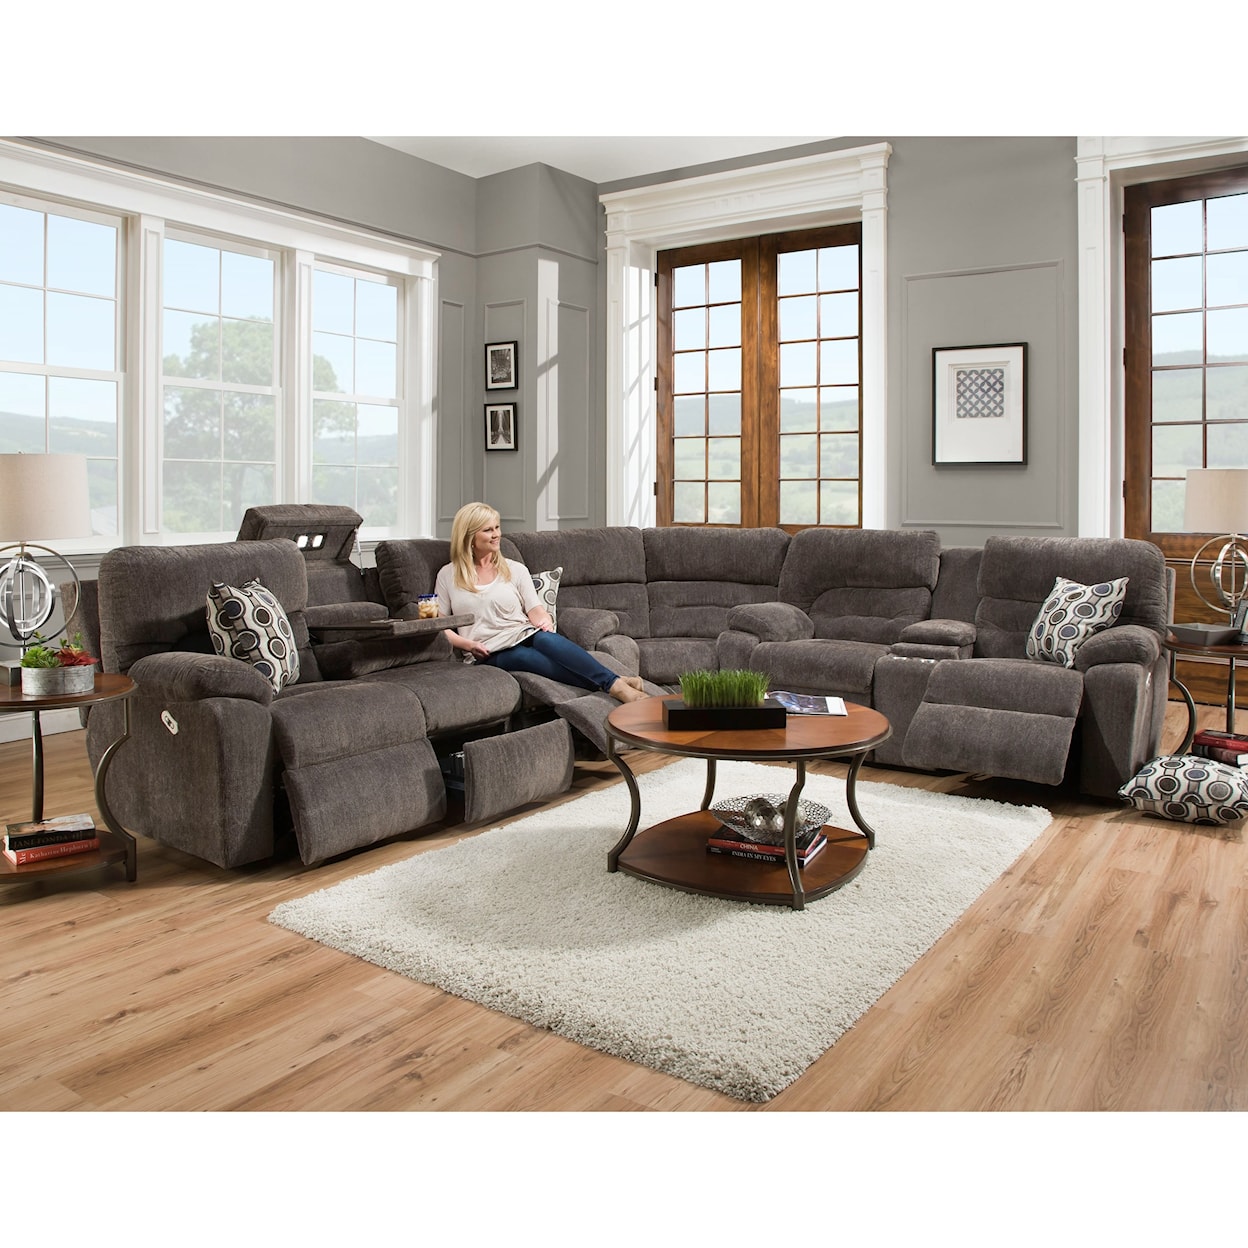 Franklin Tribute 6 Seat Power Reclining Sectional